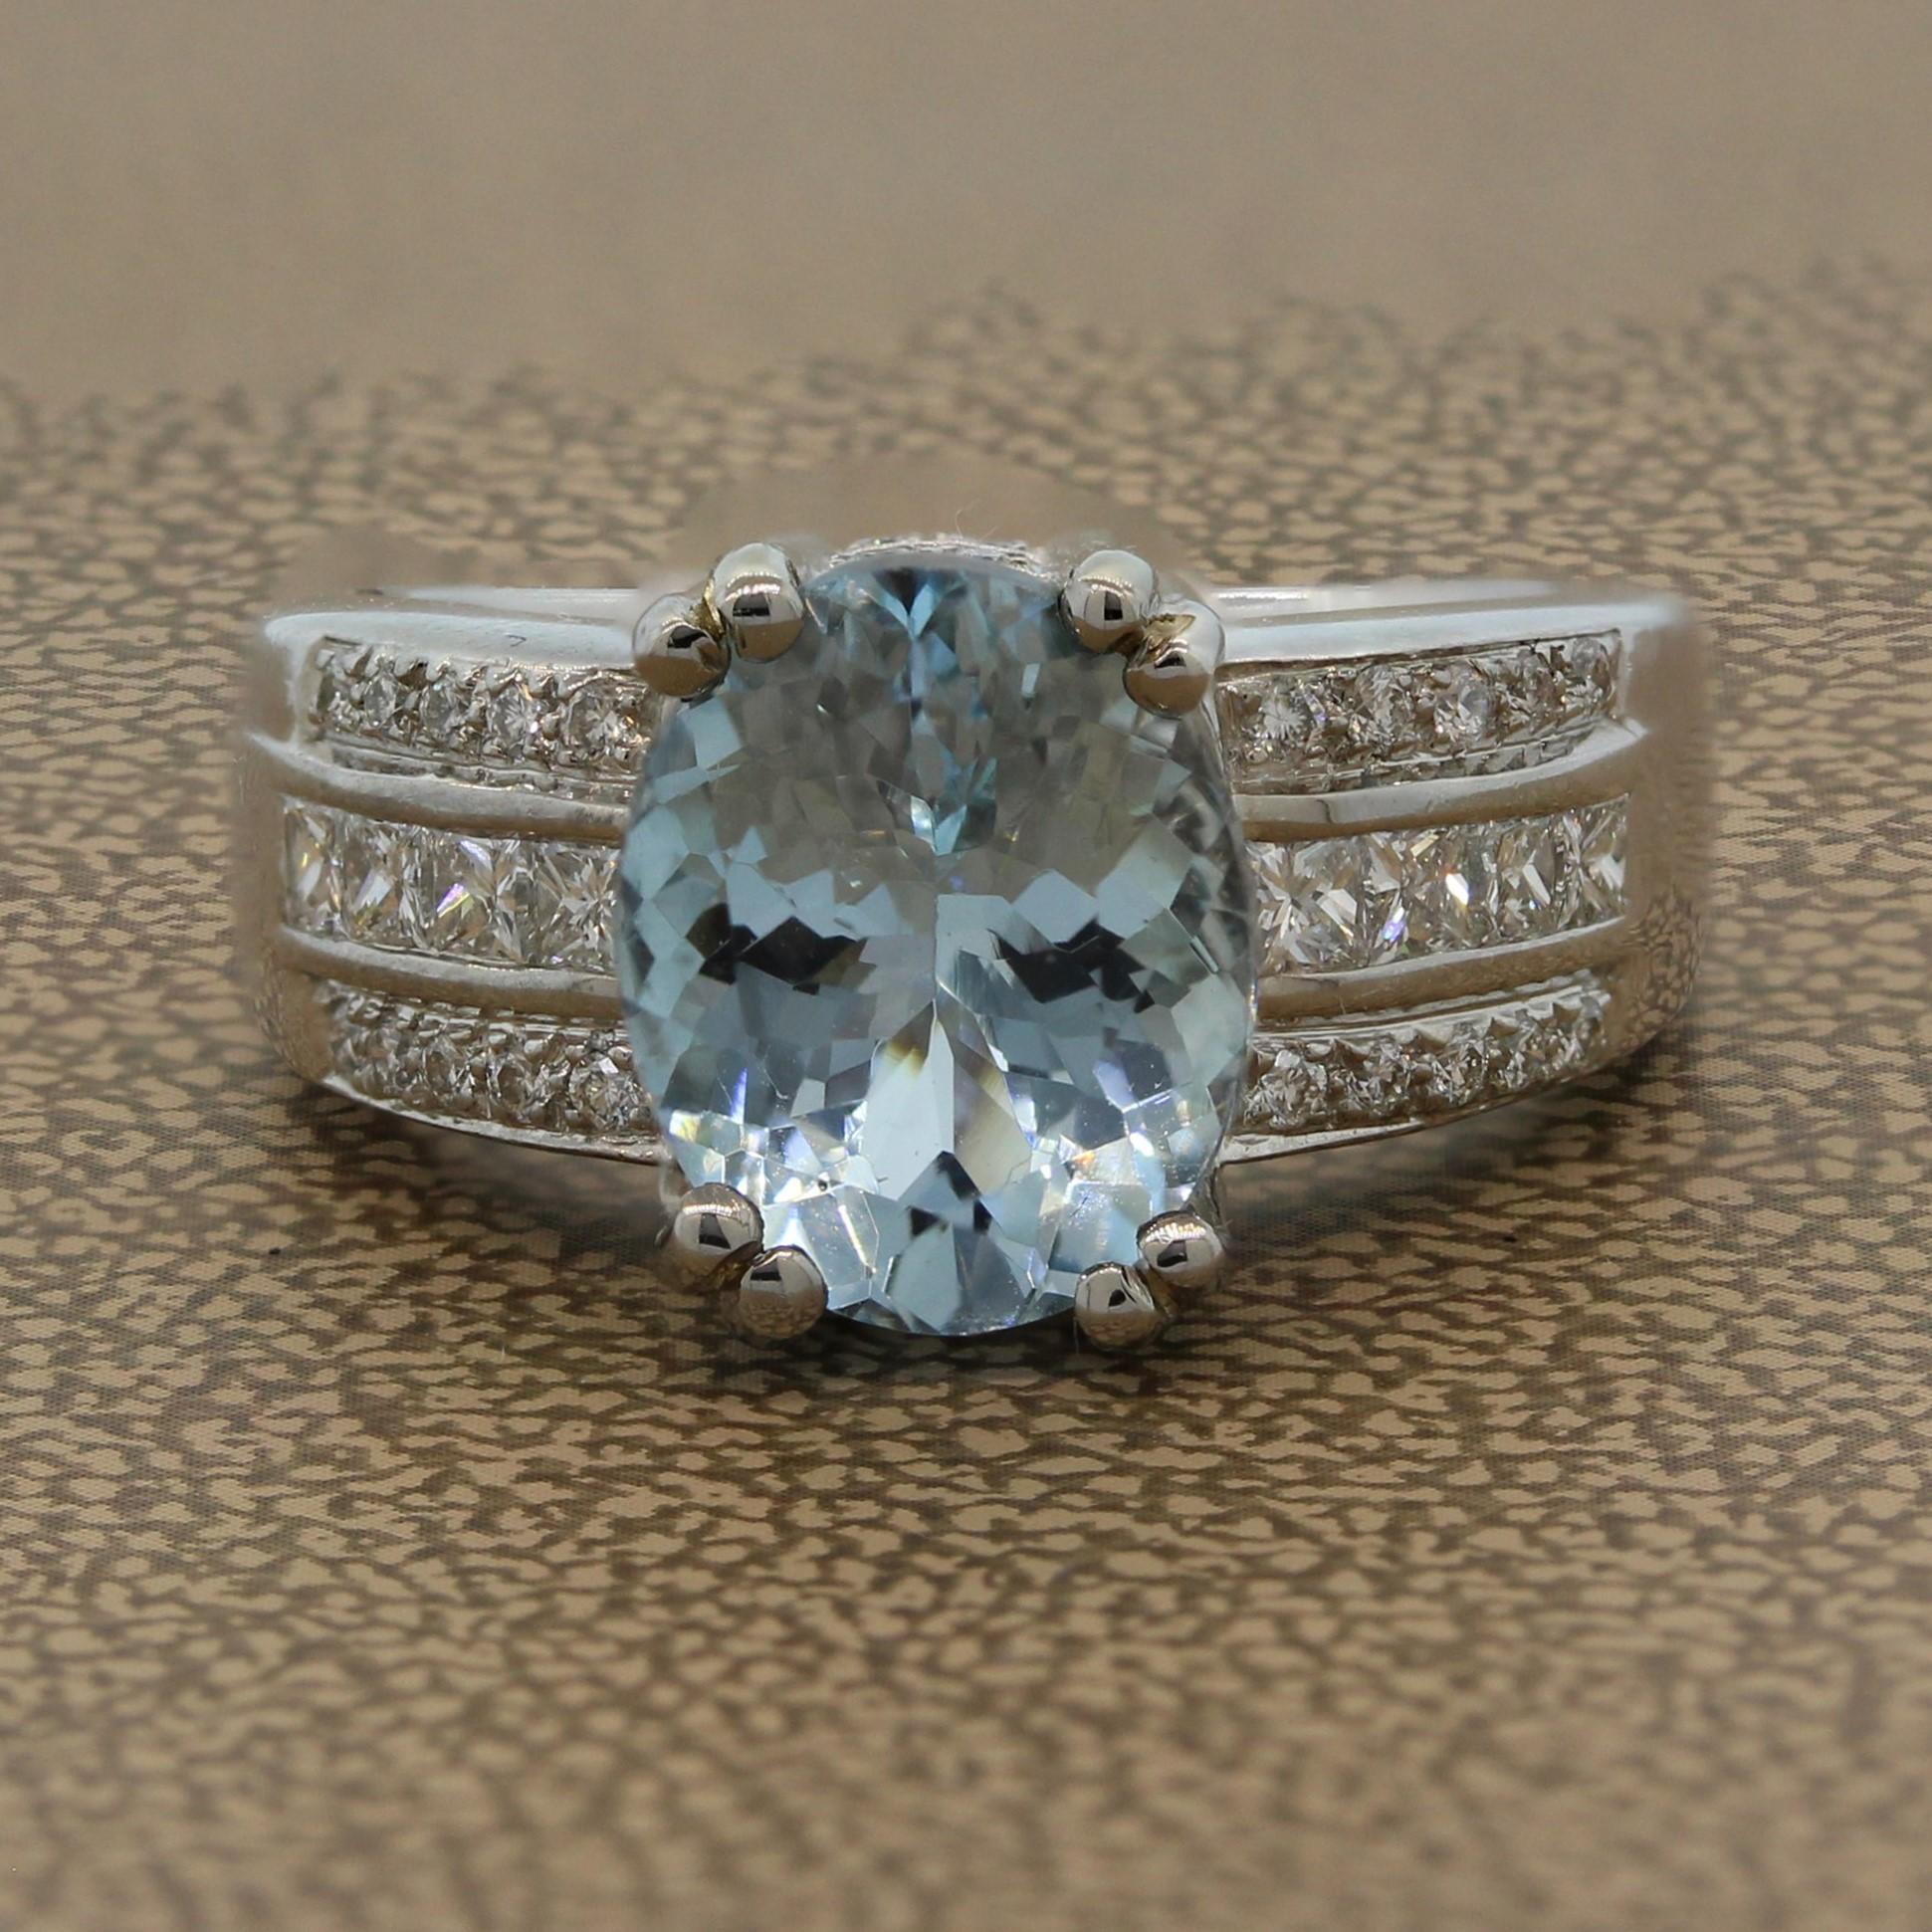 A contemporary ring featuring a 3.25 carat aquamarine with a lovely soft blue hue. The oval cut aquamarine is set in 14K white gold and is surrounded by 0.80 carats of VS quality colorless princess cut diamonds and round cut diamonds. A gem set ring